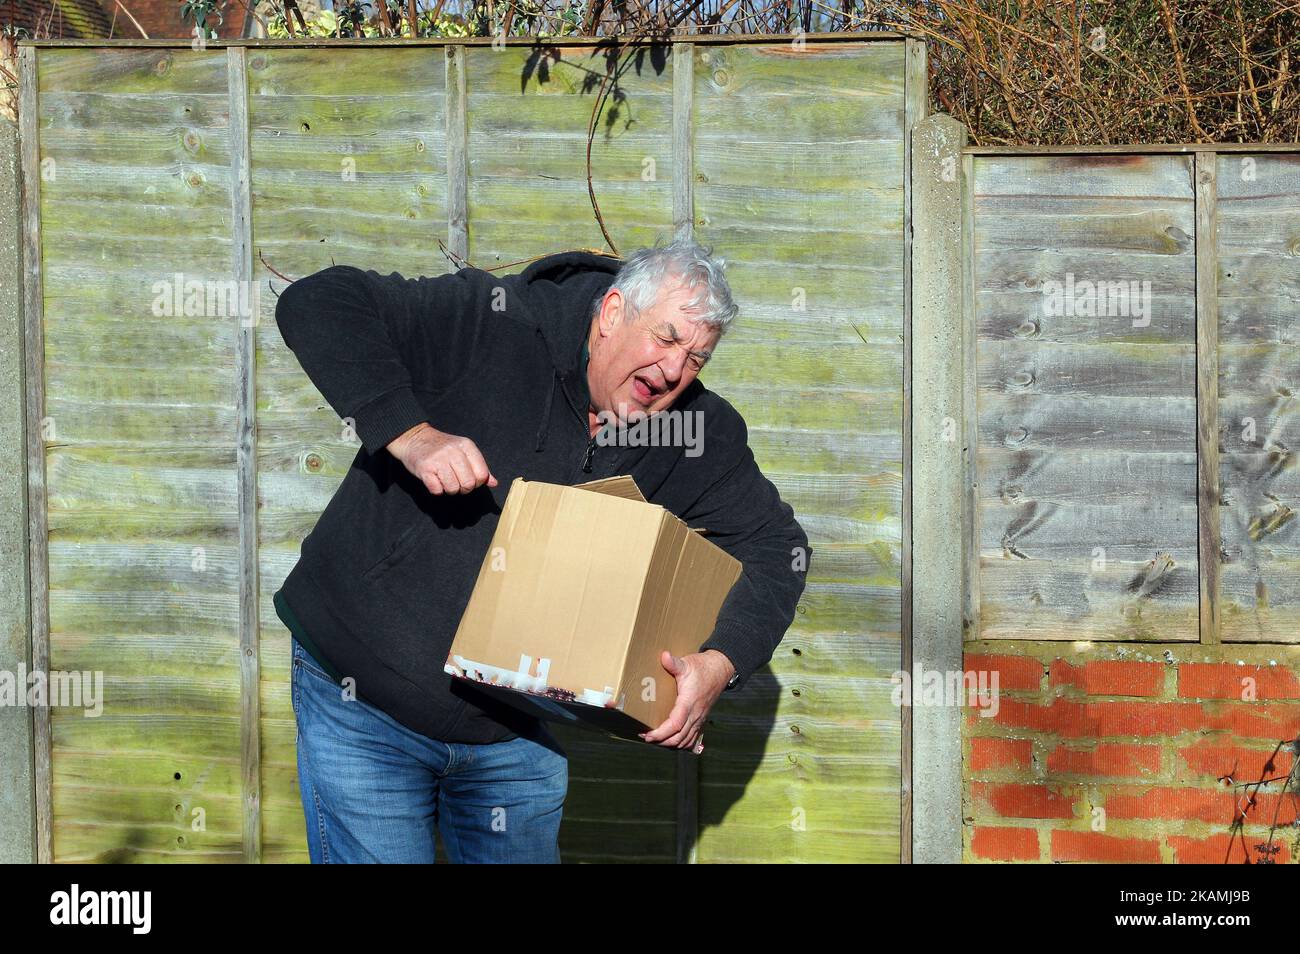 Old or elderly man lifting a heavy box and hurting himself. Box too heavy or lifting weight incorrectly. Stock Photo